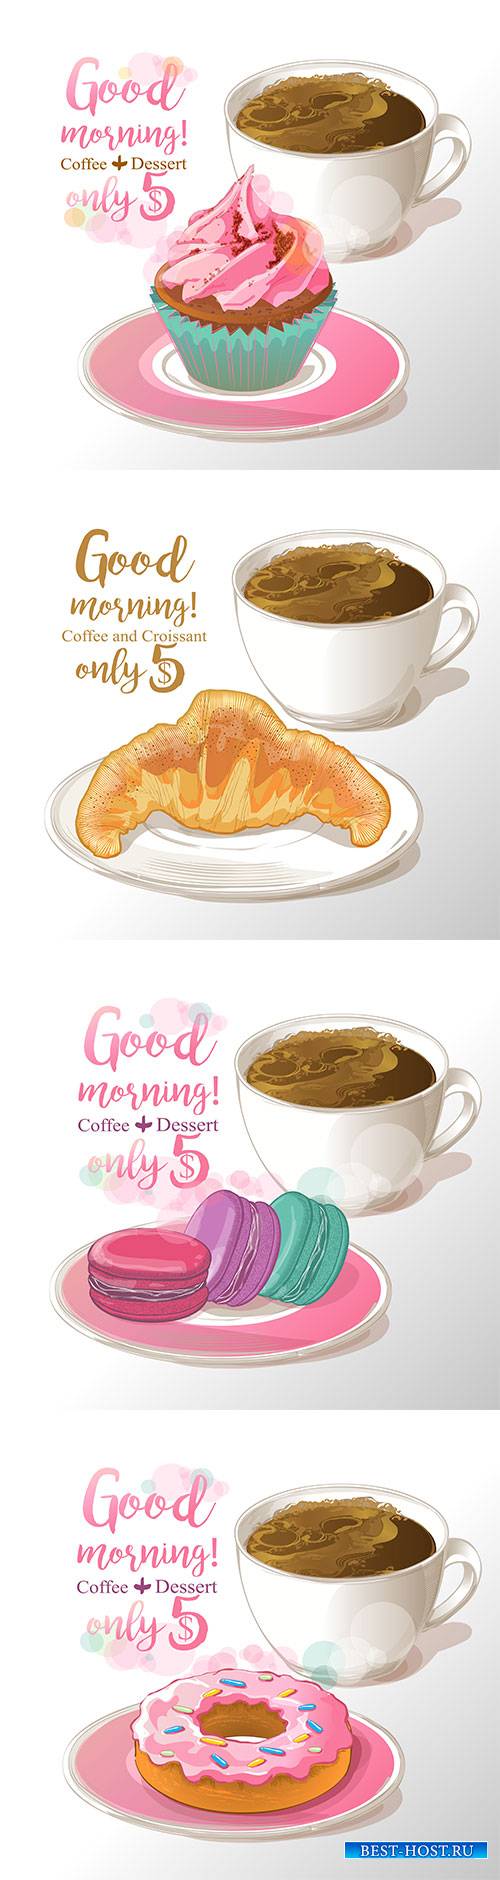 Cup of coffee and freshly baked cupcake, healthy breakfast, vector illustration